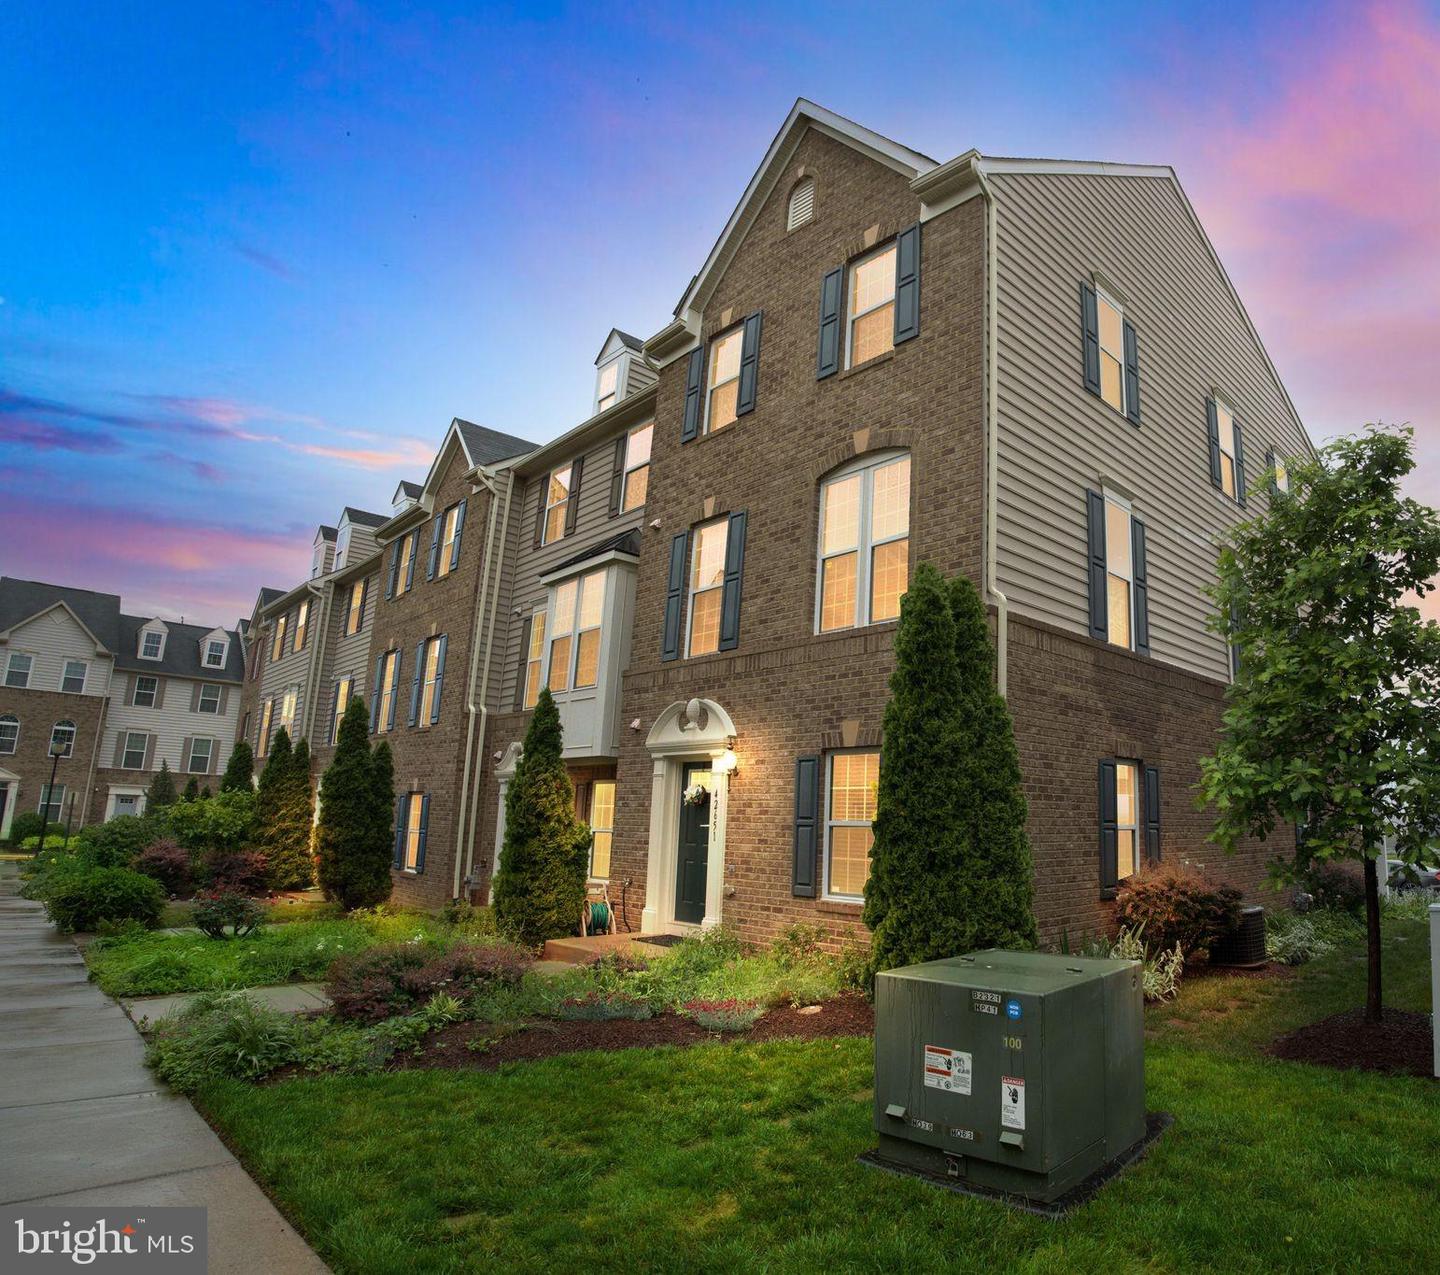 View Dulles, VA 20166 townhome